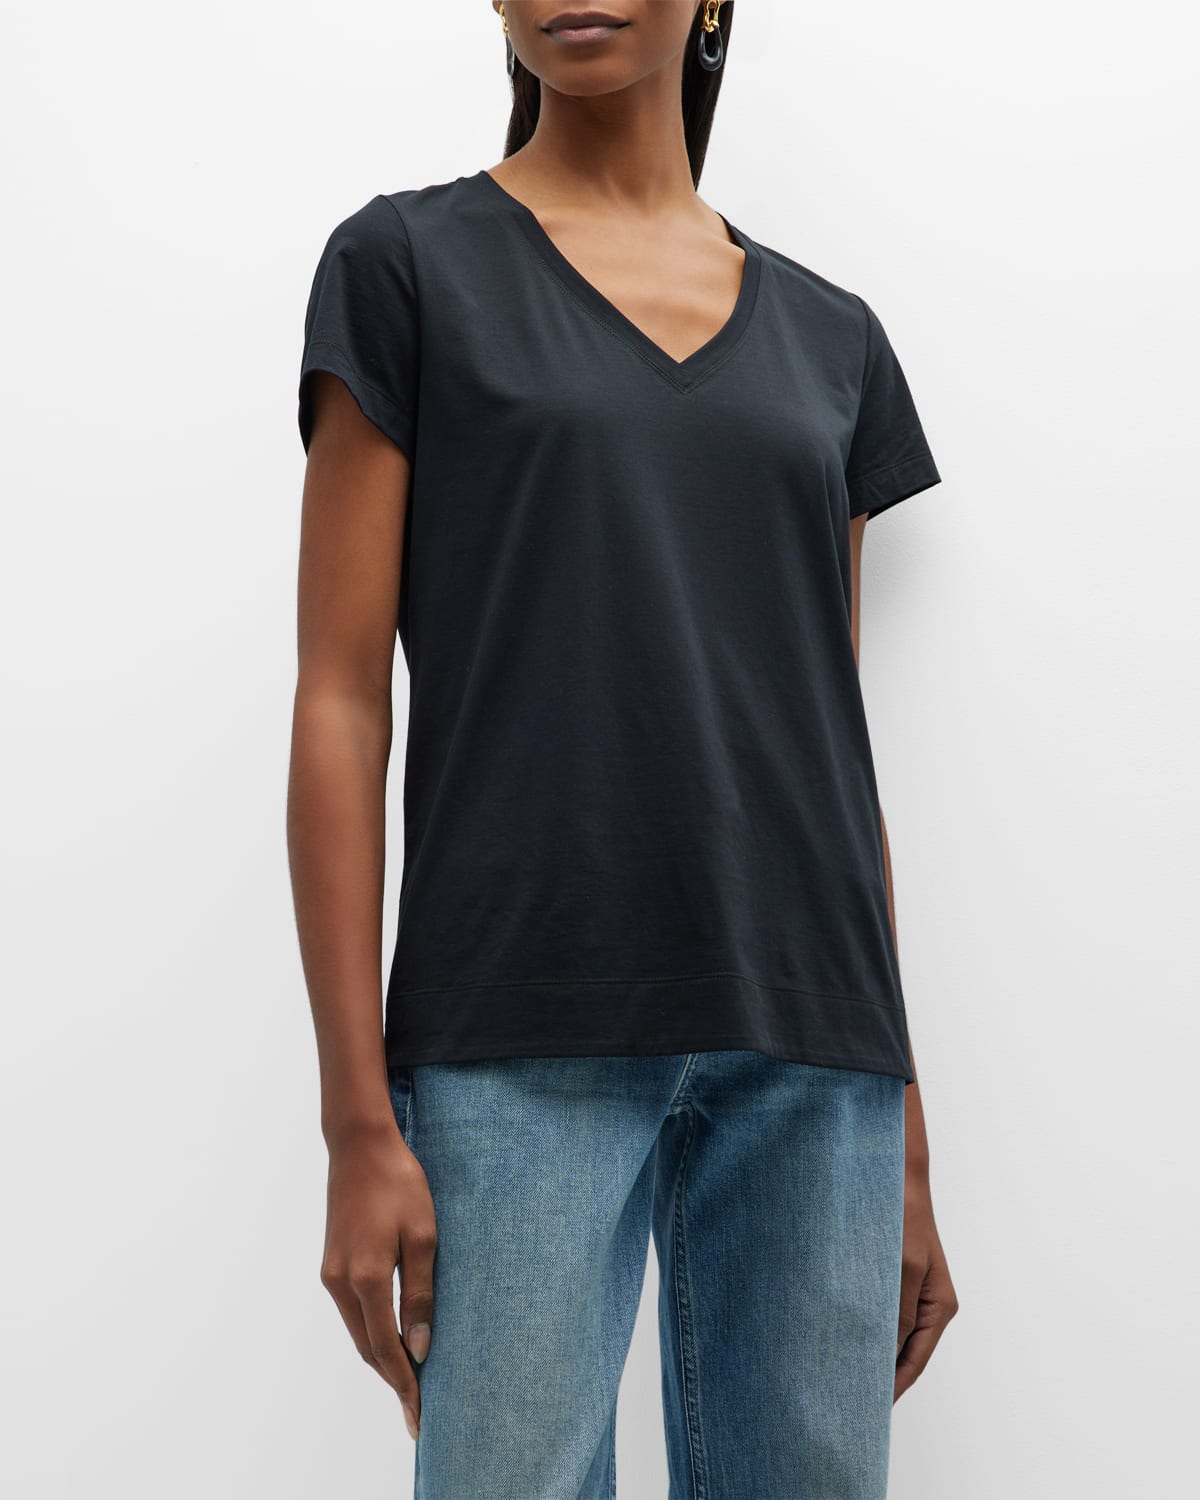 LAFAYETTE 148 PLUS SIZE THE MODERN V-NECK TEE